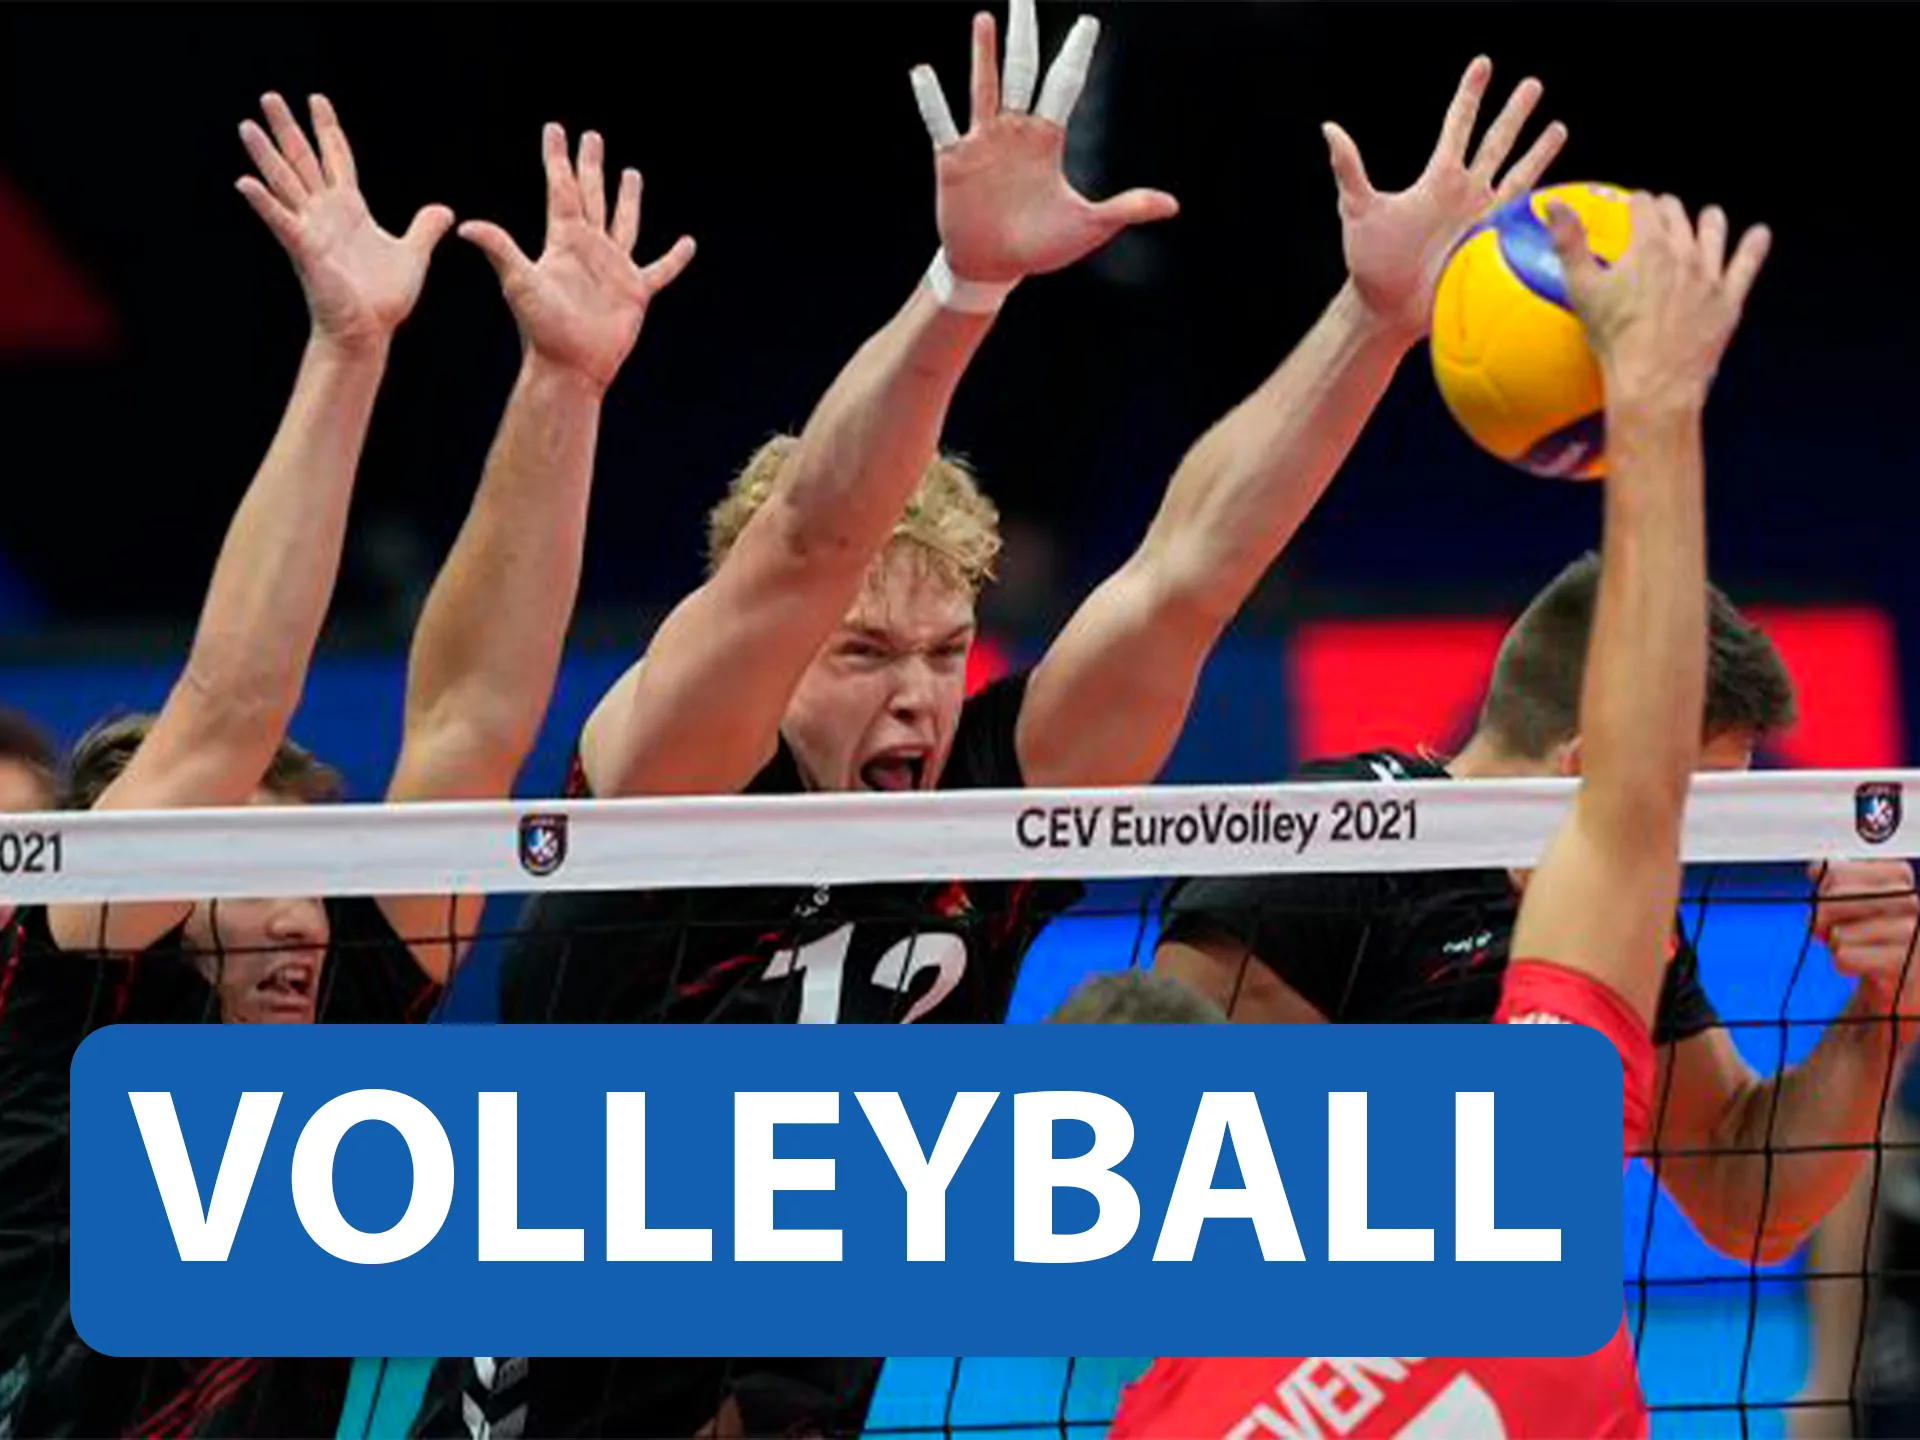 Watch live streamings and bet on vollayball at Betcity.